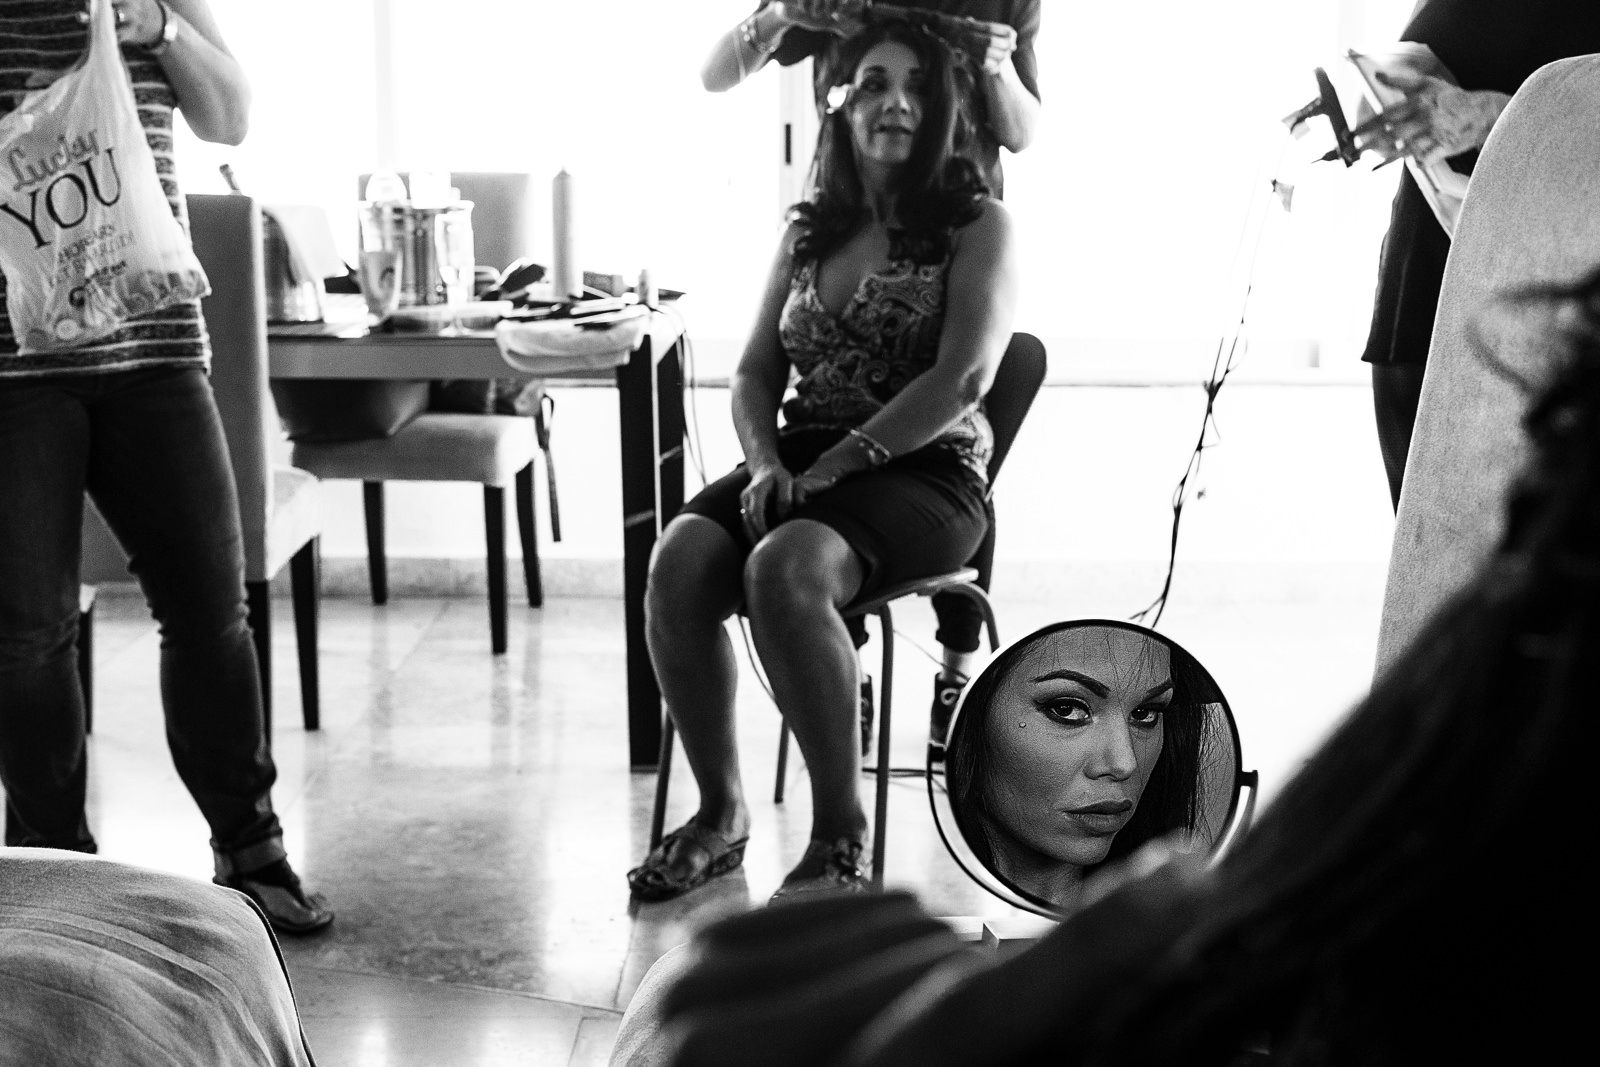 The bride's face is on the mirror and at the background her mother is getting her hair done